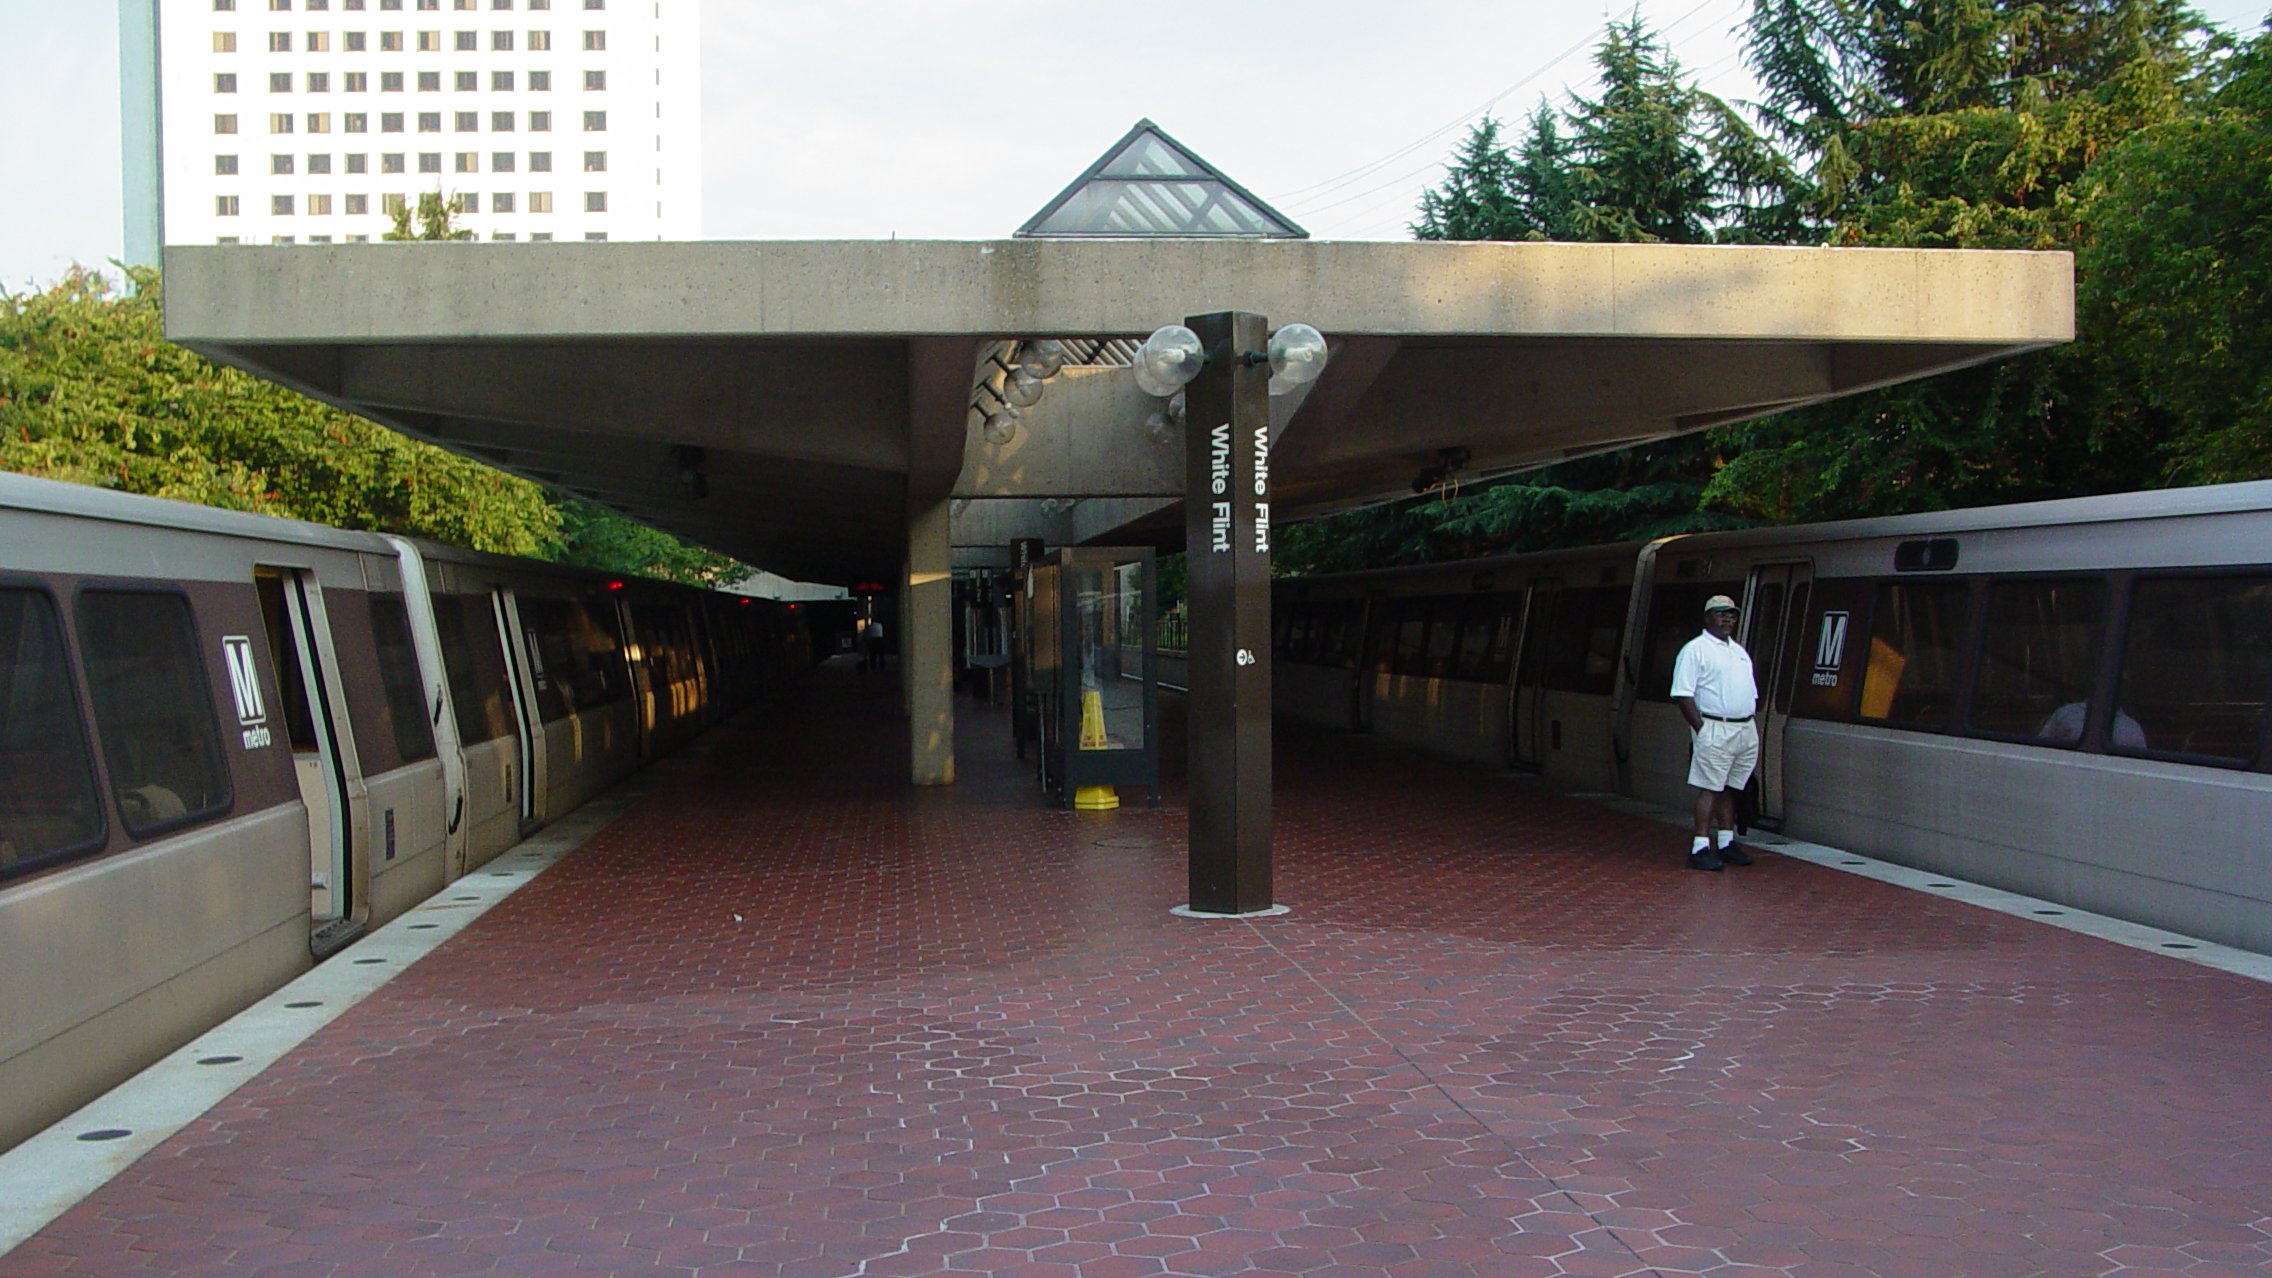 A view of the White Flint Metro station.